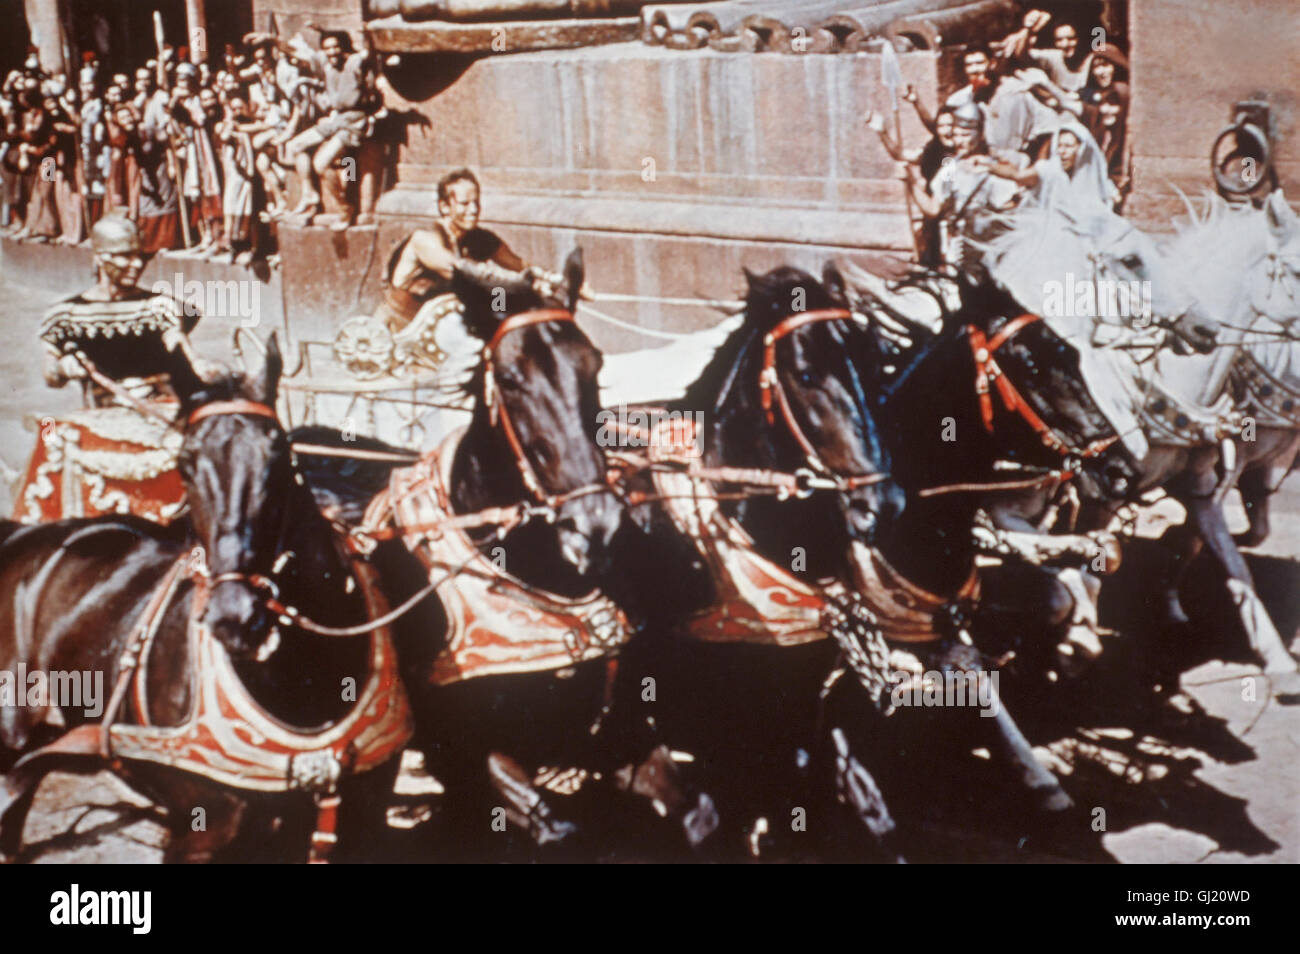 Ben Hur Movie High Resolution Stock Photography and Images - Alamy